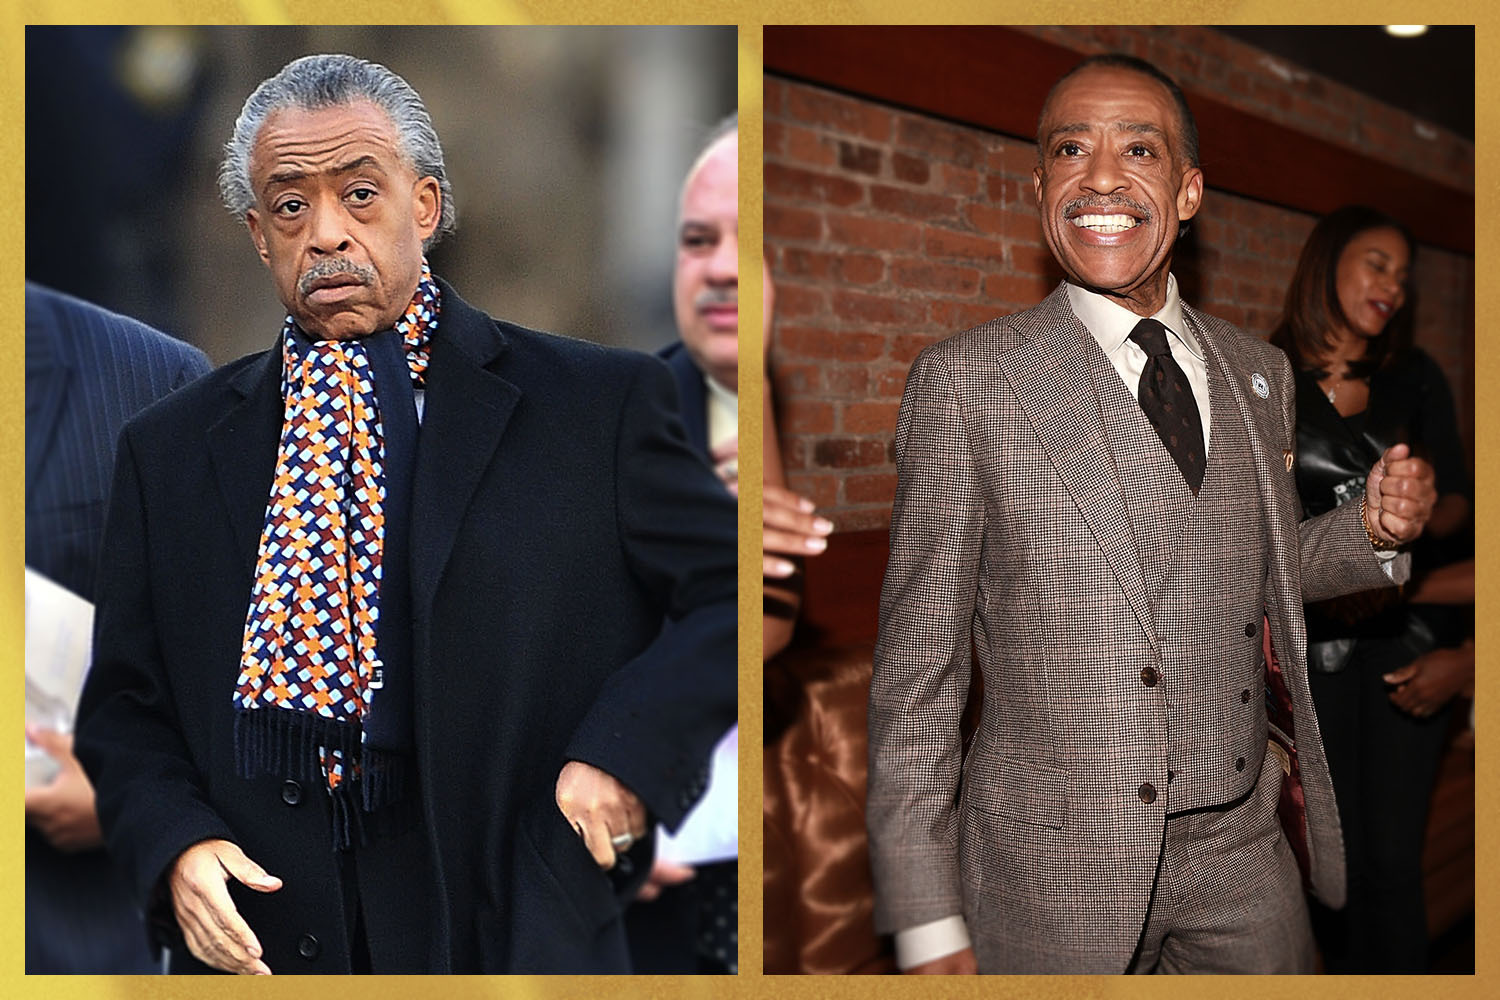 From left: Al Sharpton in a black overcoat and patterned scarf; Al Sharpton in a windowpane three-piece wool suit